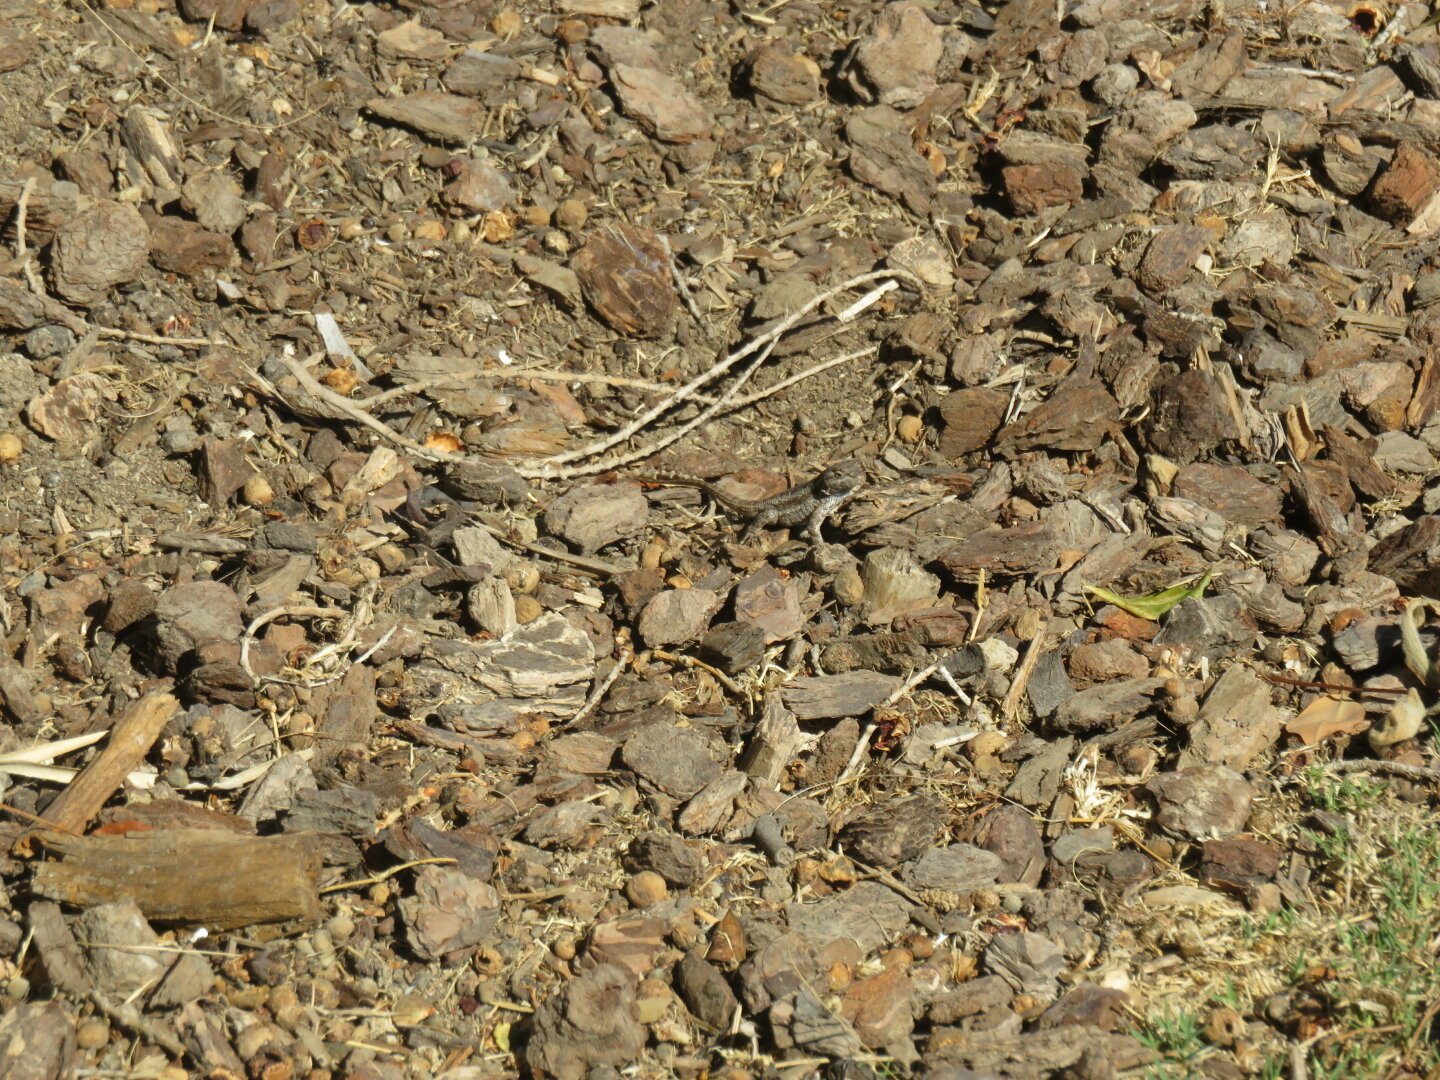 
A whole bunch of wood chips on the ground. There is a light brown lizard blending in with them.